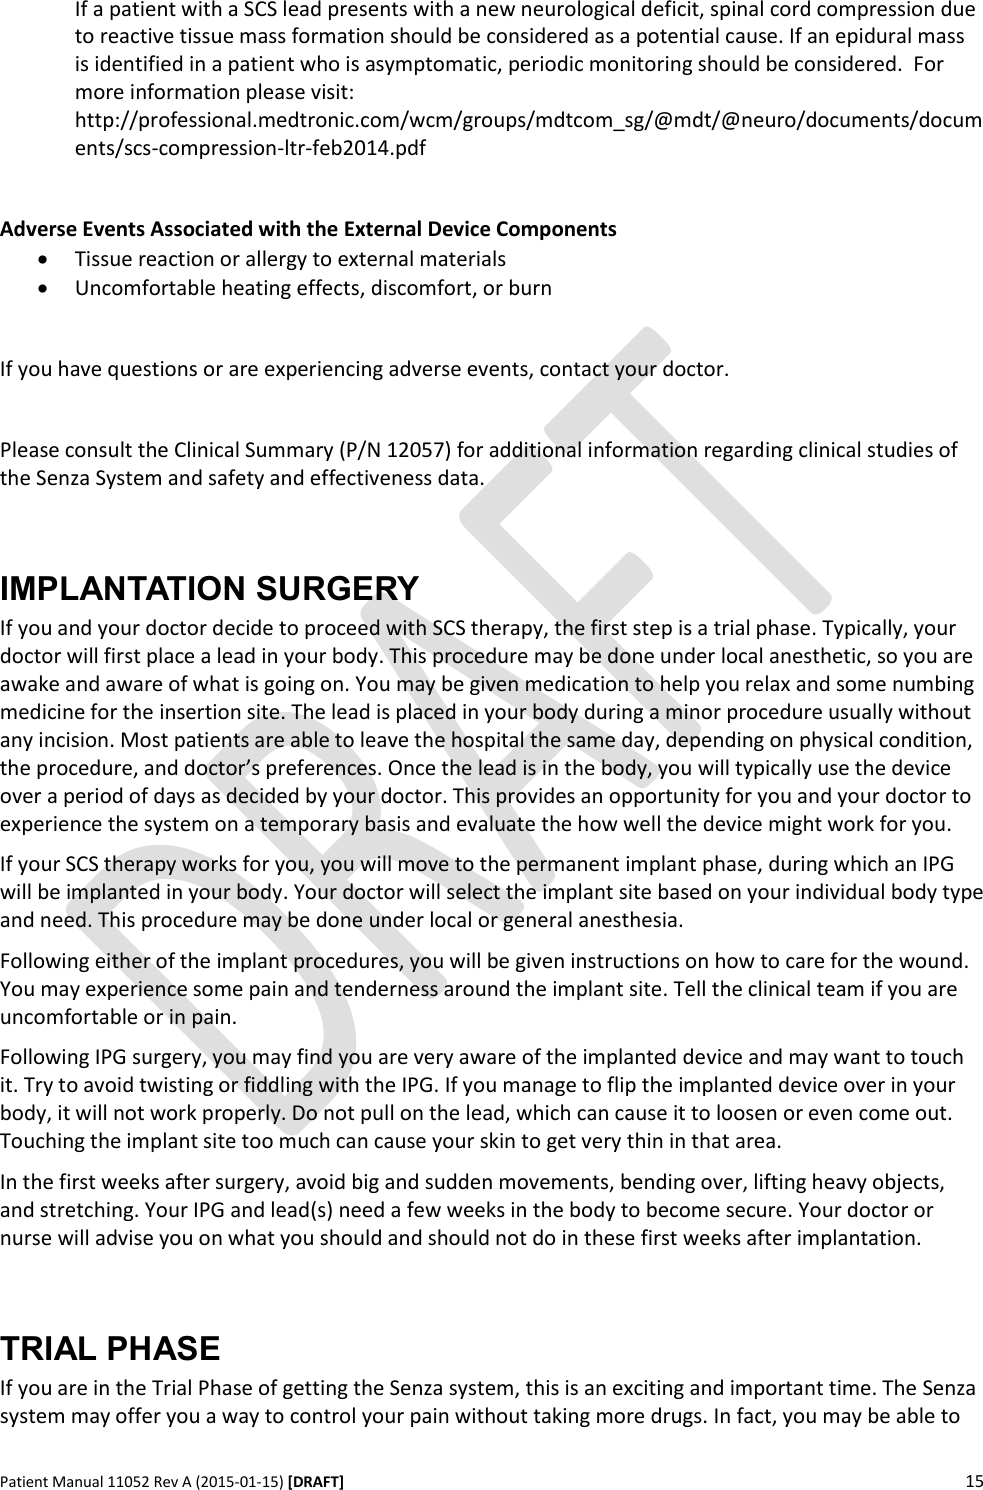      Patient Manual 11052 Rev A (2015-01-15) [DRAFT] 15   If a patient with a SCS lead presents with a new neurological deficit, spinal cord compression due to reactive tissue mass formation should be considered as a potential cause. If an epidural mass is identified in a patient who is asymptomatic, periodic monitoring should be considered.  For more information please visit: http://professional.medtronic.com/wcm/groups/mdtcom_sg/@mdt/@neuro/documents/documents/scs-compression-ltr-feb2014.pdf  Adverse Events Associated with the External Device Components  Tissue reaction or allergy to external materials  Uncomfortable heating effects, discomfort, or burn  If you have questions or are experiencing adverse events, contact your doctor.   Please consult the Clinical Summary (P/N 12057) for additional information regarding clinical studies of the Senza System and safety and effectiveness data.  IMPLANTATION SURGERY If you and your doctor decide to proceed with SCS therapy, the first step is a trial phase. Typically, your doctor will first place a lead in your body. This procedure may be done under local anesthetic, so you are awake and aware of what is going on. You may be given medication to help you relax and some numbing medicine for the insertion site. The lead is placed in your body during a minor procedure usually without any incision. Most patients are able to leave the hospital the same day, depending on physical condition, the procedure, and doctor’s preferences. Once the lead is in the body, you will typically use the device over a period of days as decided by your doctor. This provides an opportunity for you and your doctor to experience the system on a temporary basis and evaluate the how well the device might work for you.  If your SCS therapy works for you, you will move to the permanent implant phase, during which an IPG will be implanted in your body. Your doctor will select the implant site based on your individual body type and need. This procedure may be done under local or general anesthesia.  Following either of the implant procedures, you will be given instructions on how to care for the wound. You may experience some pain and tenderness around the implant site. Tell the clinical team if you are uncomfortable or in pain. Following IPG surgery, you may find you are very aware of the implanted device and may want to touch it. Try to avoid twisting or fiddling with the IPG. If you manage to flip the implanted device over in your body, it will not work properly. Do not pull on the lead, which can cause it to loosen or even come out. Touching the implant site too much can cause your skin to get very thin in that area. In the first weeks after surgery, avoid big and sudden movements, bending over, lifting heavy objects, and stretching. Your IPG and lead(s) need a few weeks in the body to become secure. Your doctor or nurse will advise you on what you should and should not do in these first weeks after implantation.  TRIAL PHASE If you are in the Trial Phase of getting the Senza system, this is an exciting and important time. The Senza system may offer you a way to control your pain without taking more drugs. In fact, you may be able to 